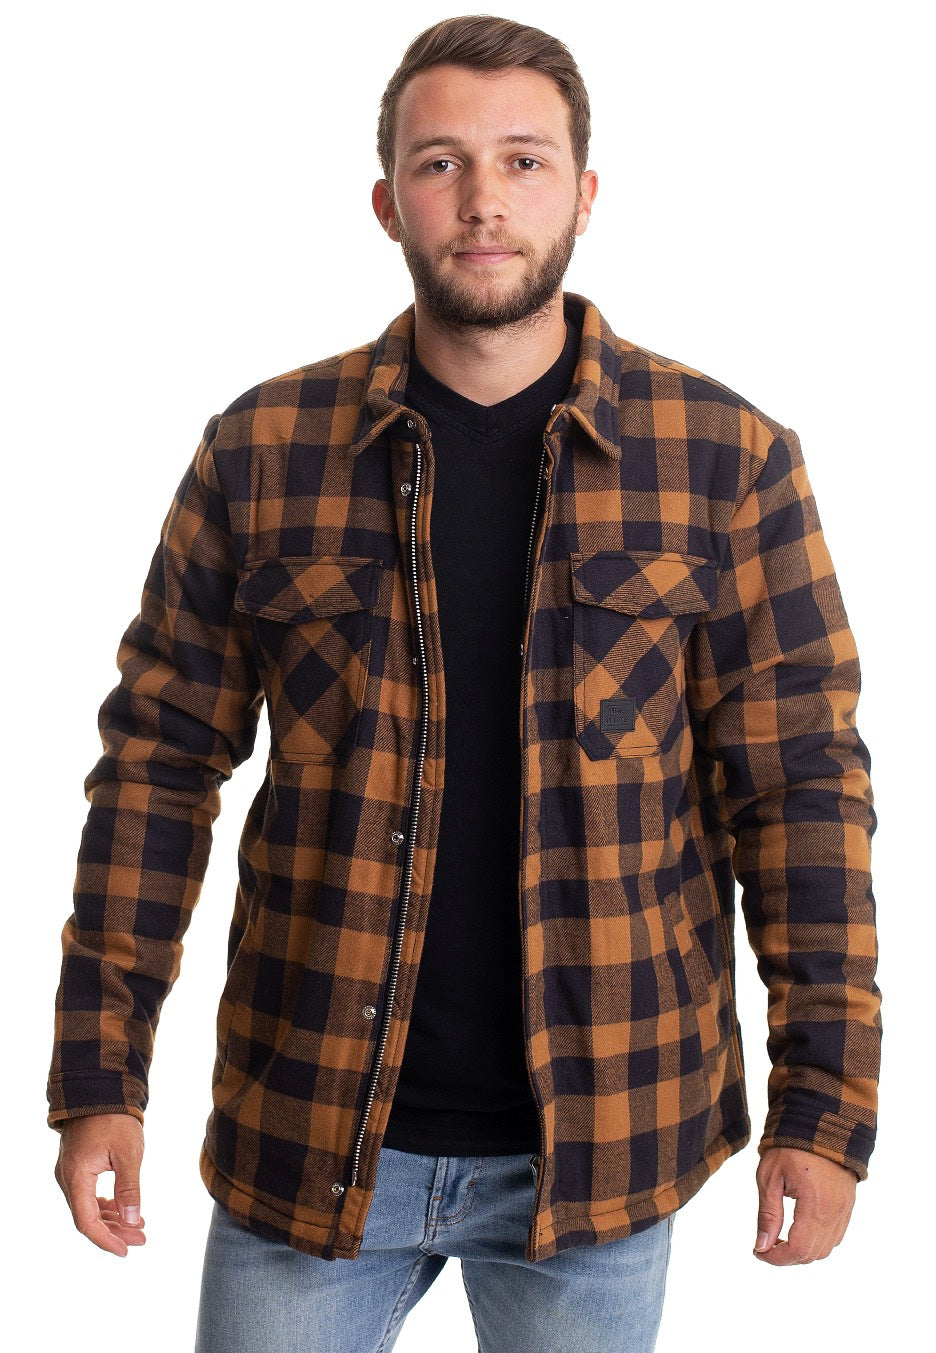 Vintage Industries - Craft Heavyweight Sherpa Yellow Check - Jacket